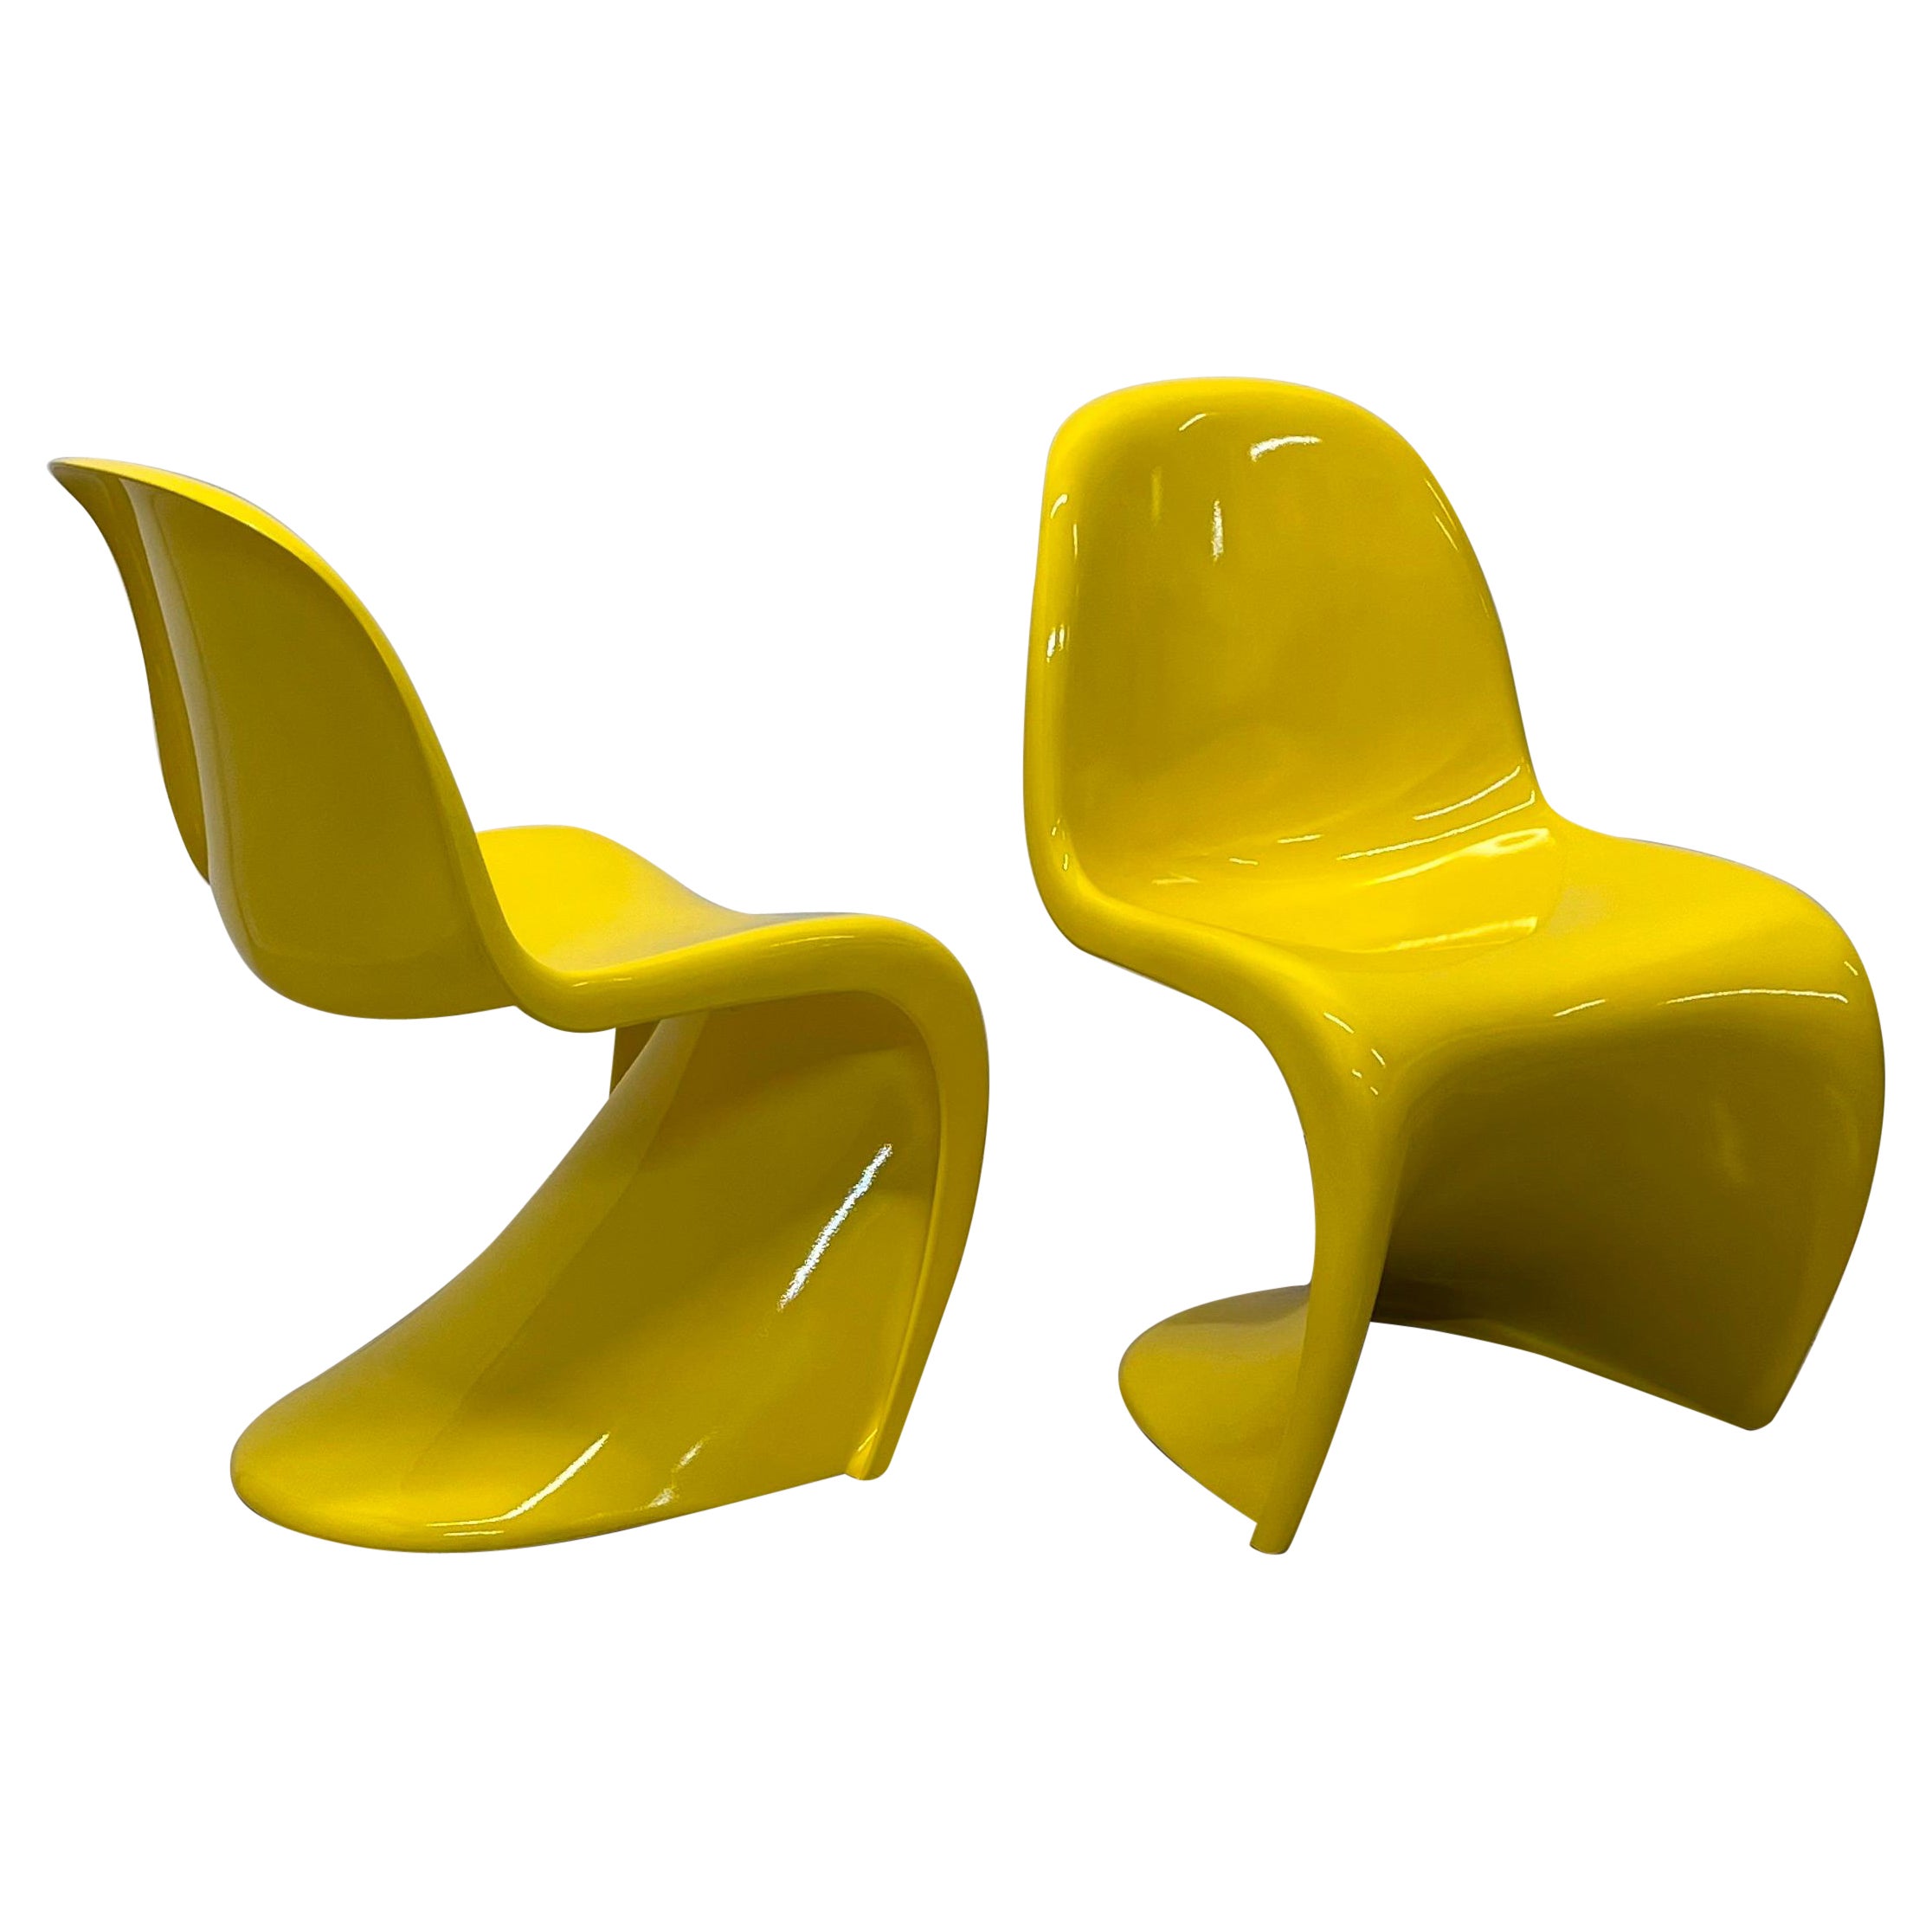 Verner Panton Classic Panton S Chairs for Vitra, 1990s - a Pair